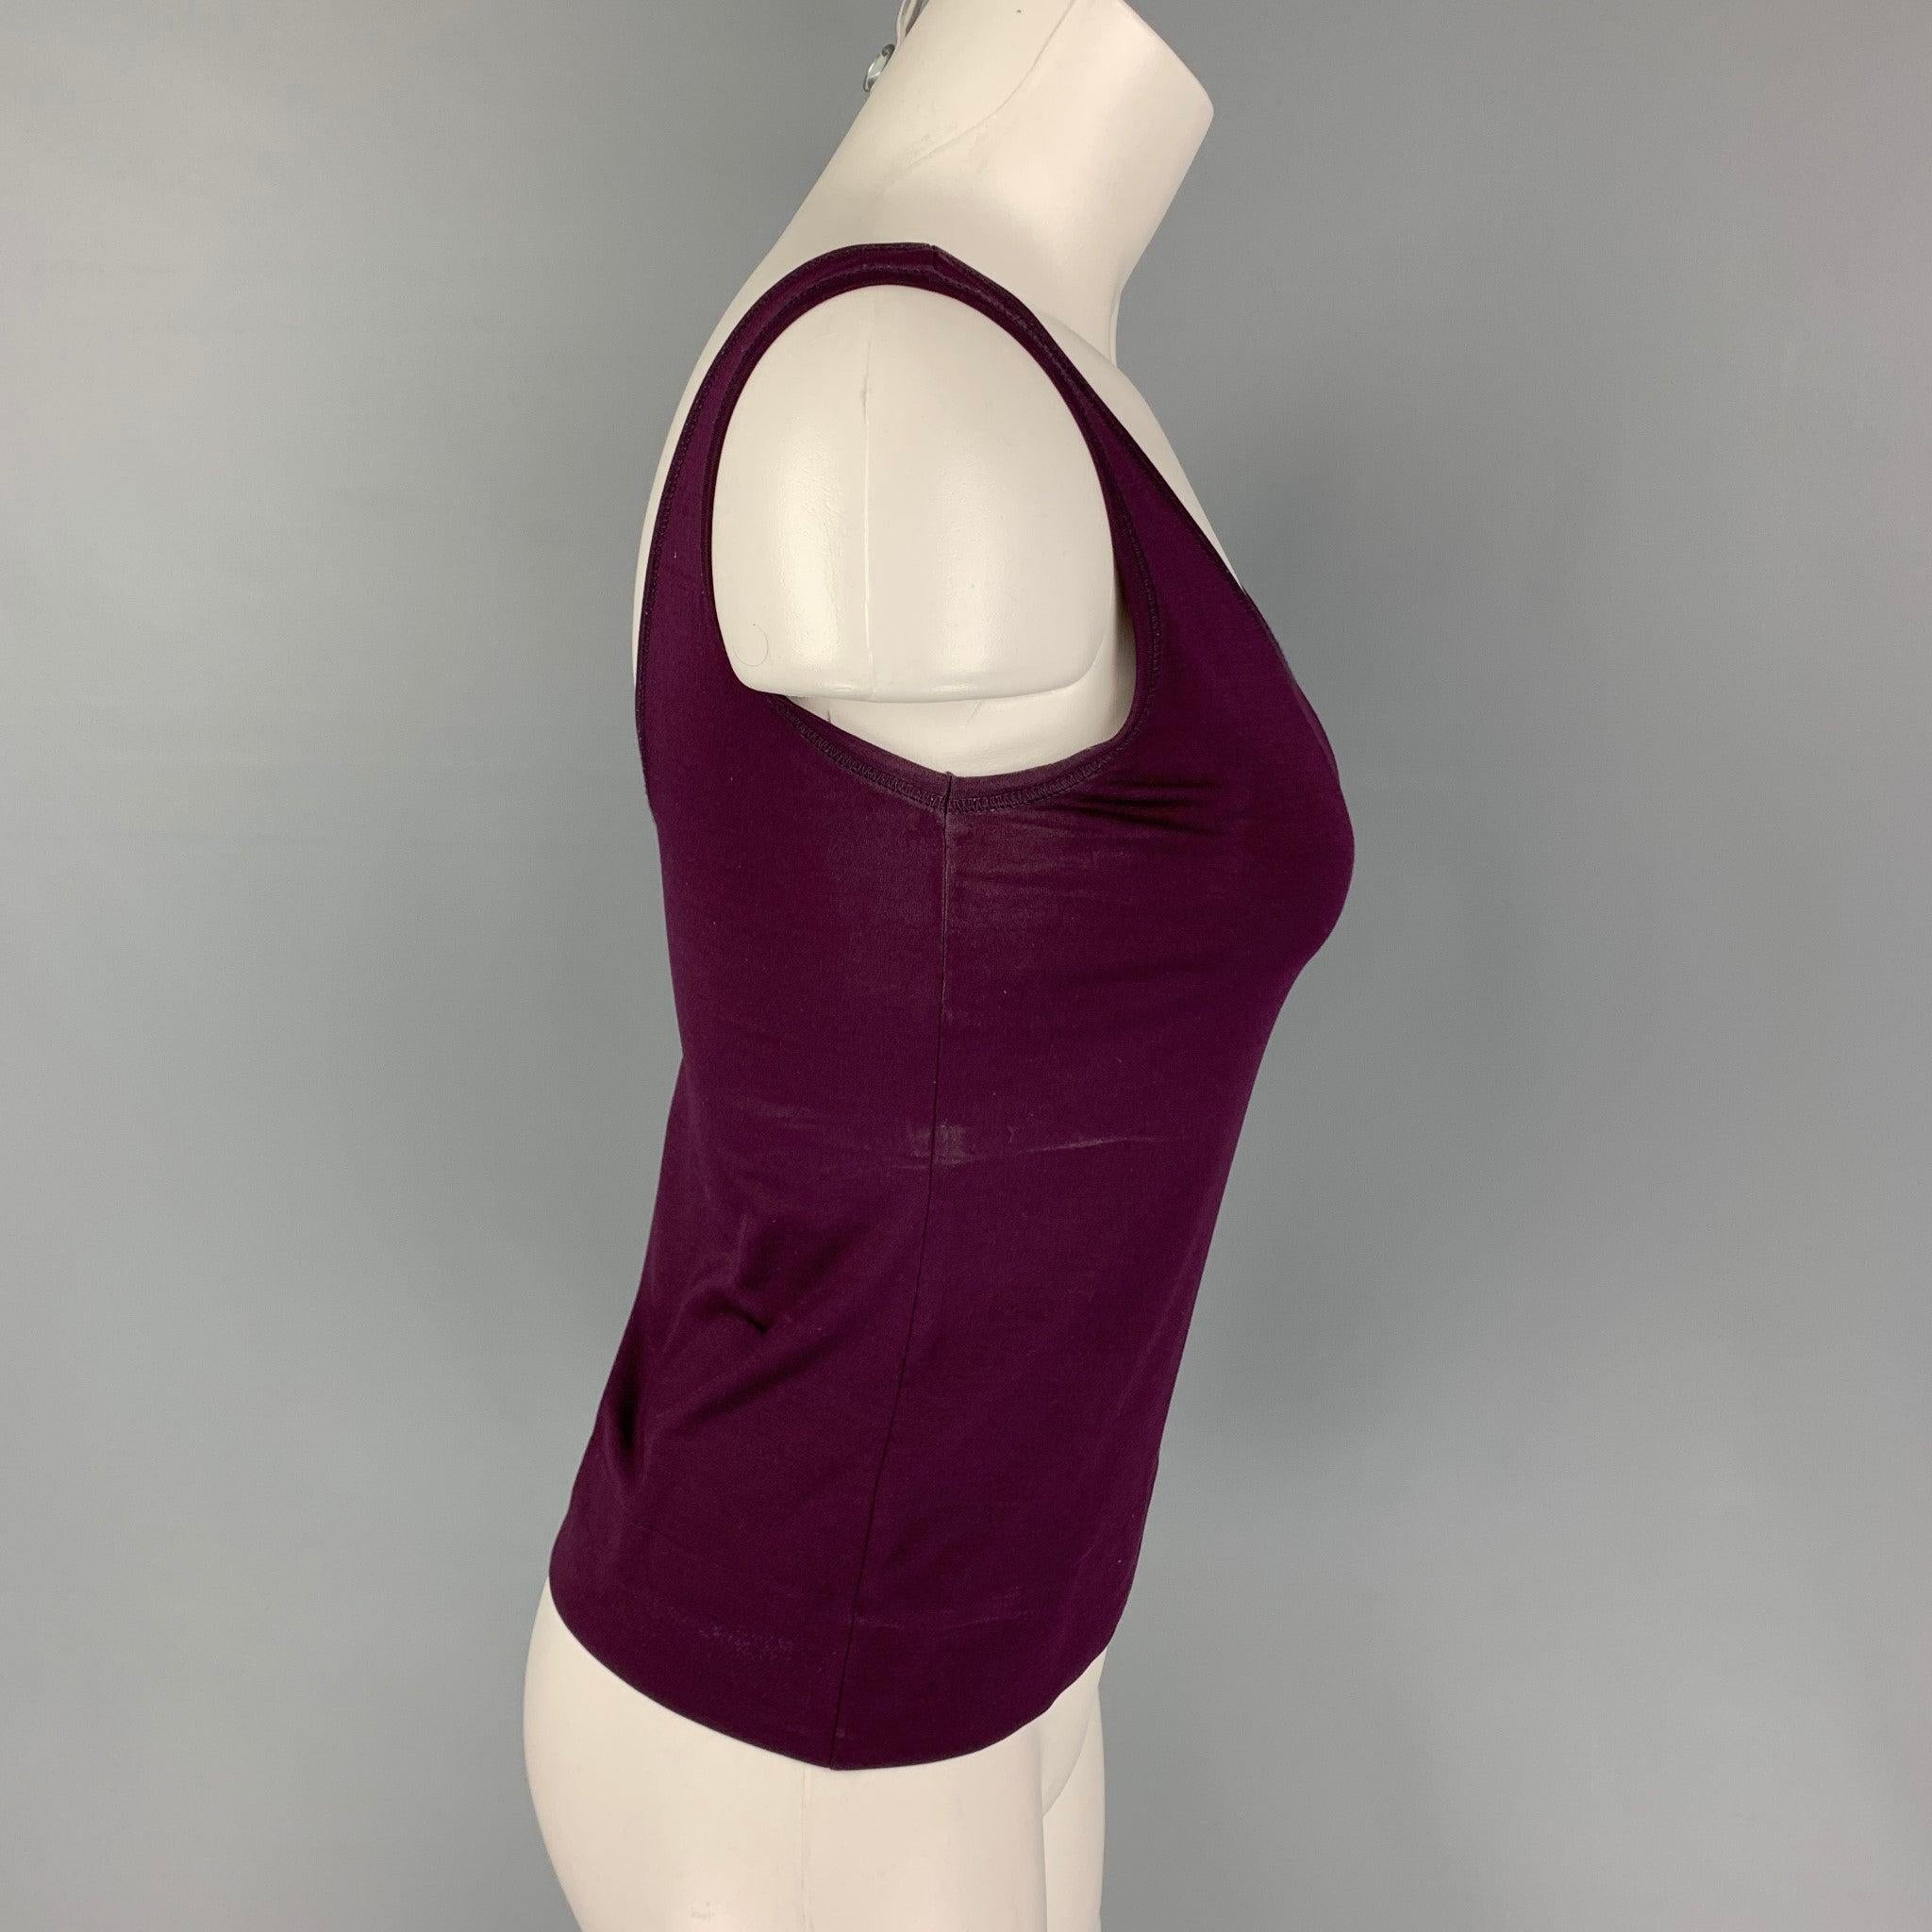 JIL SANDER tank top comes in a eggplant silk. Made in Italy.
Fair
Pre-Owned Condition. Moderate discoloration throughout. As-Is.  

Marked:   Size tag removed.  

Measurements: 
  Bust:
28 inches  Length: 11.5 inches 
  
  
 
Reference: